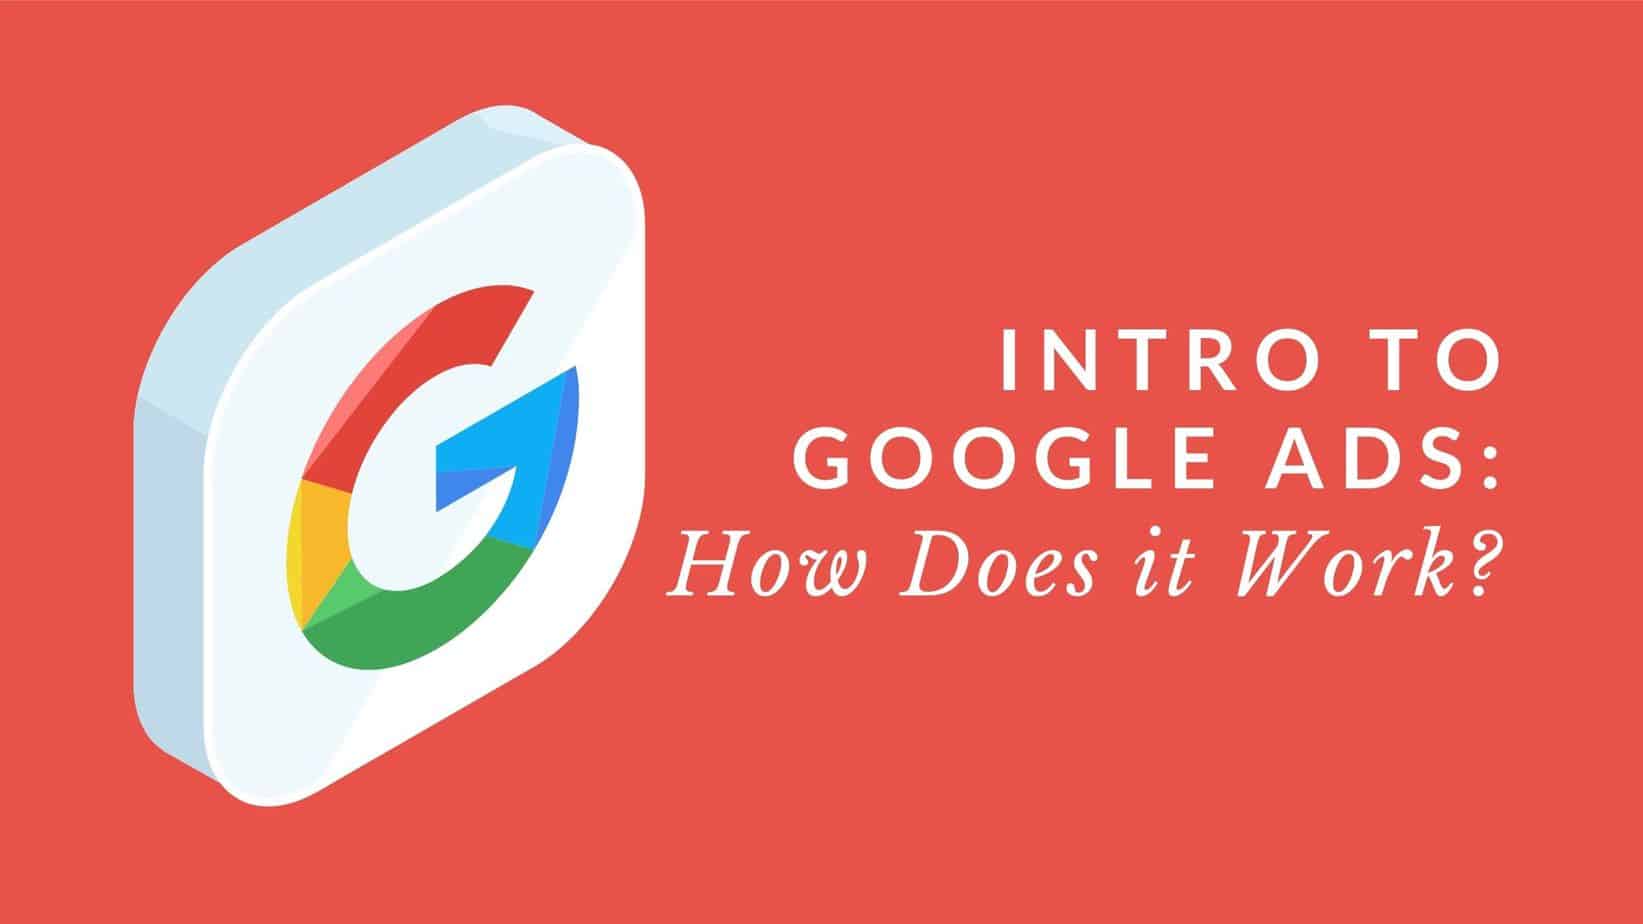 Featured image for “Intro to Google Ads: How Does it Work?”